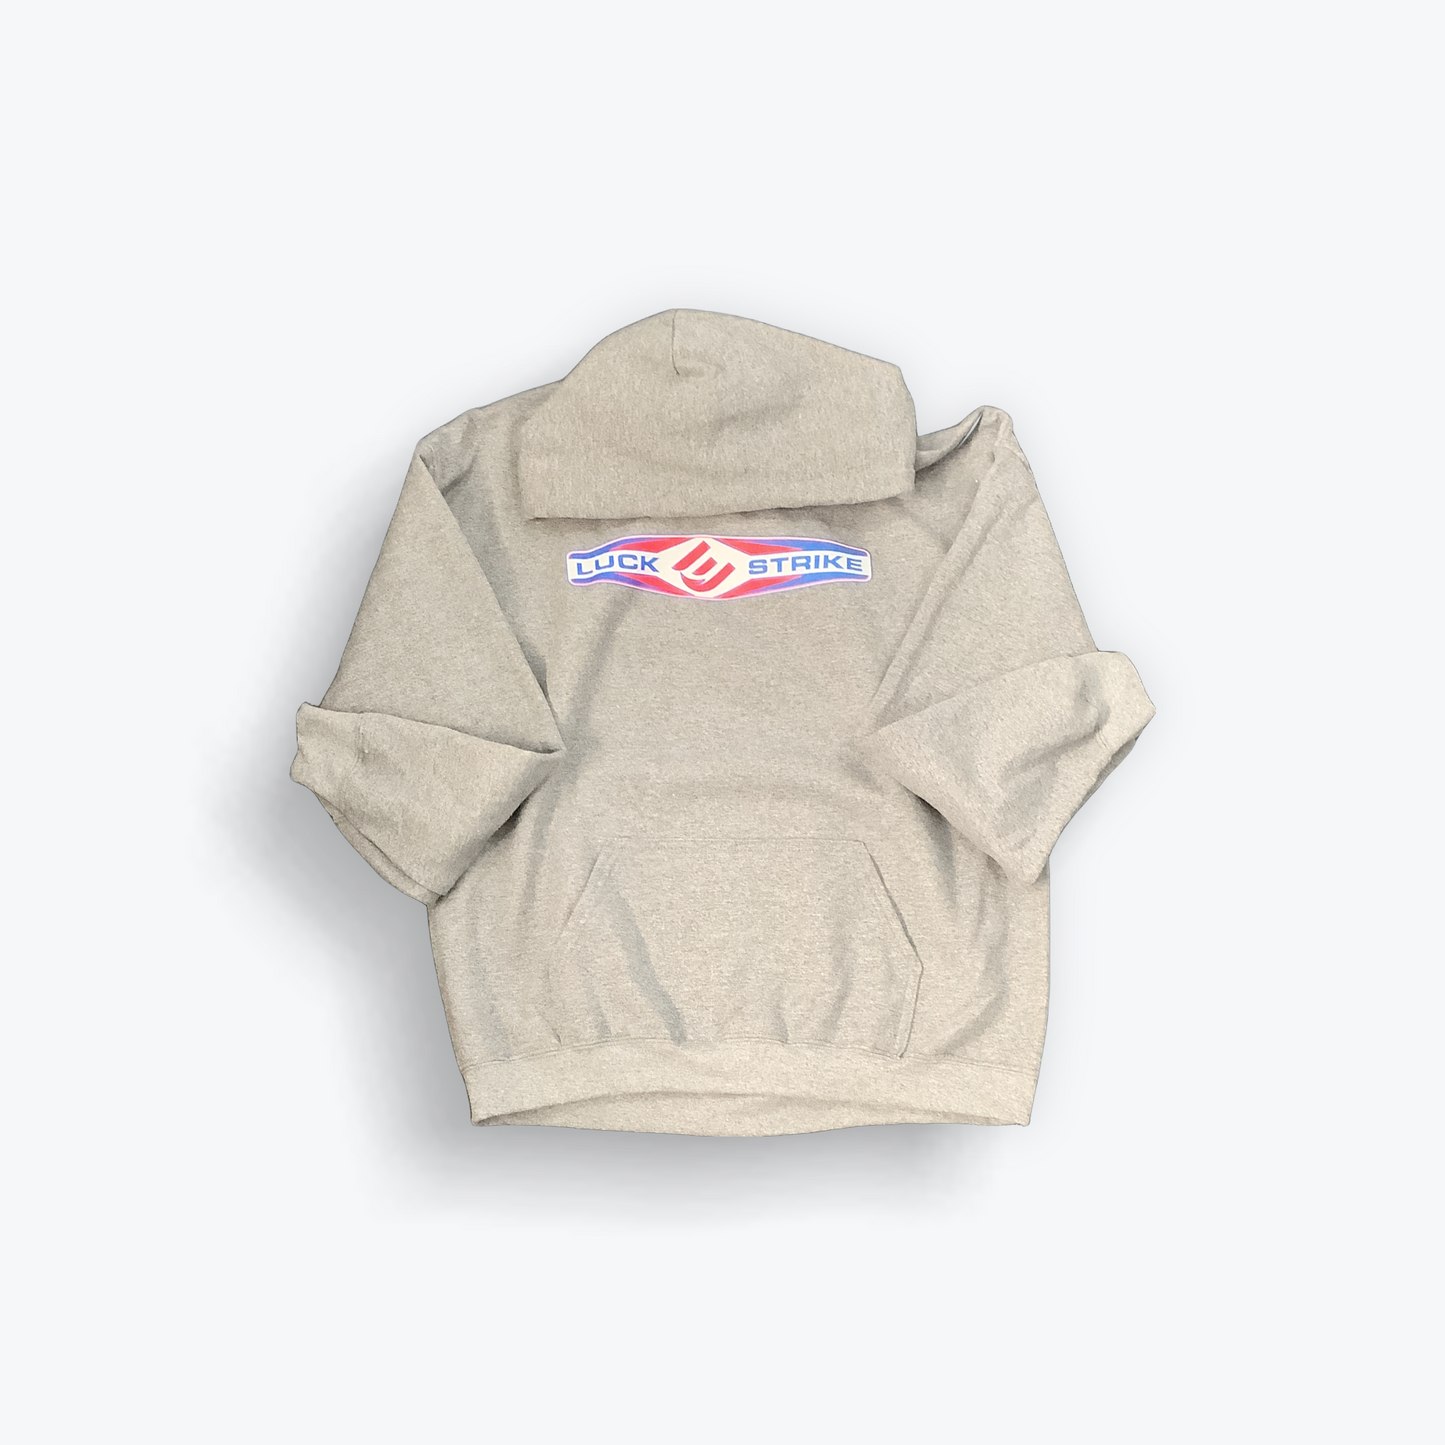 Gray Sweatshirt with Red White and Blue logo